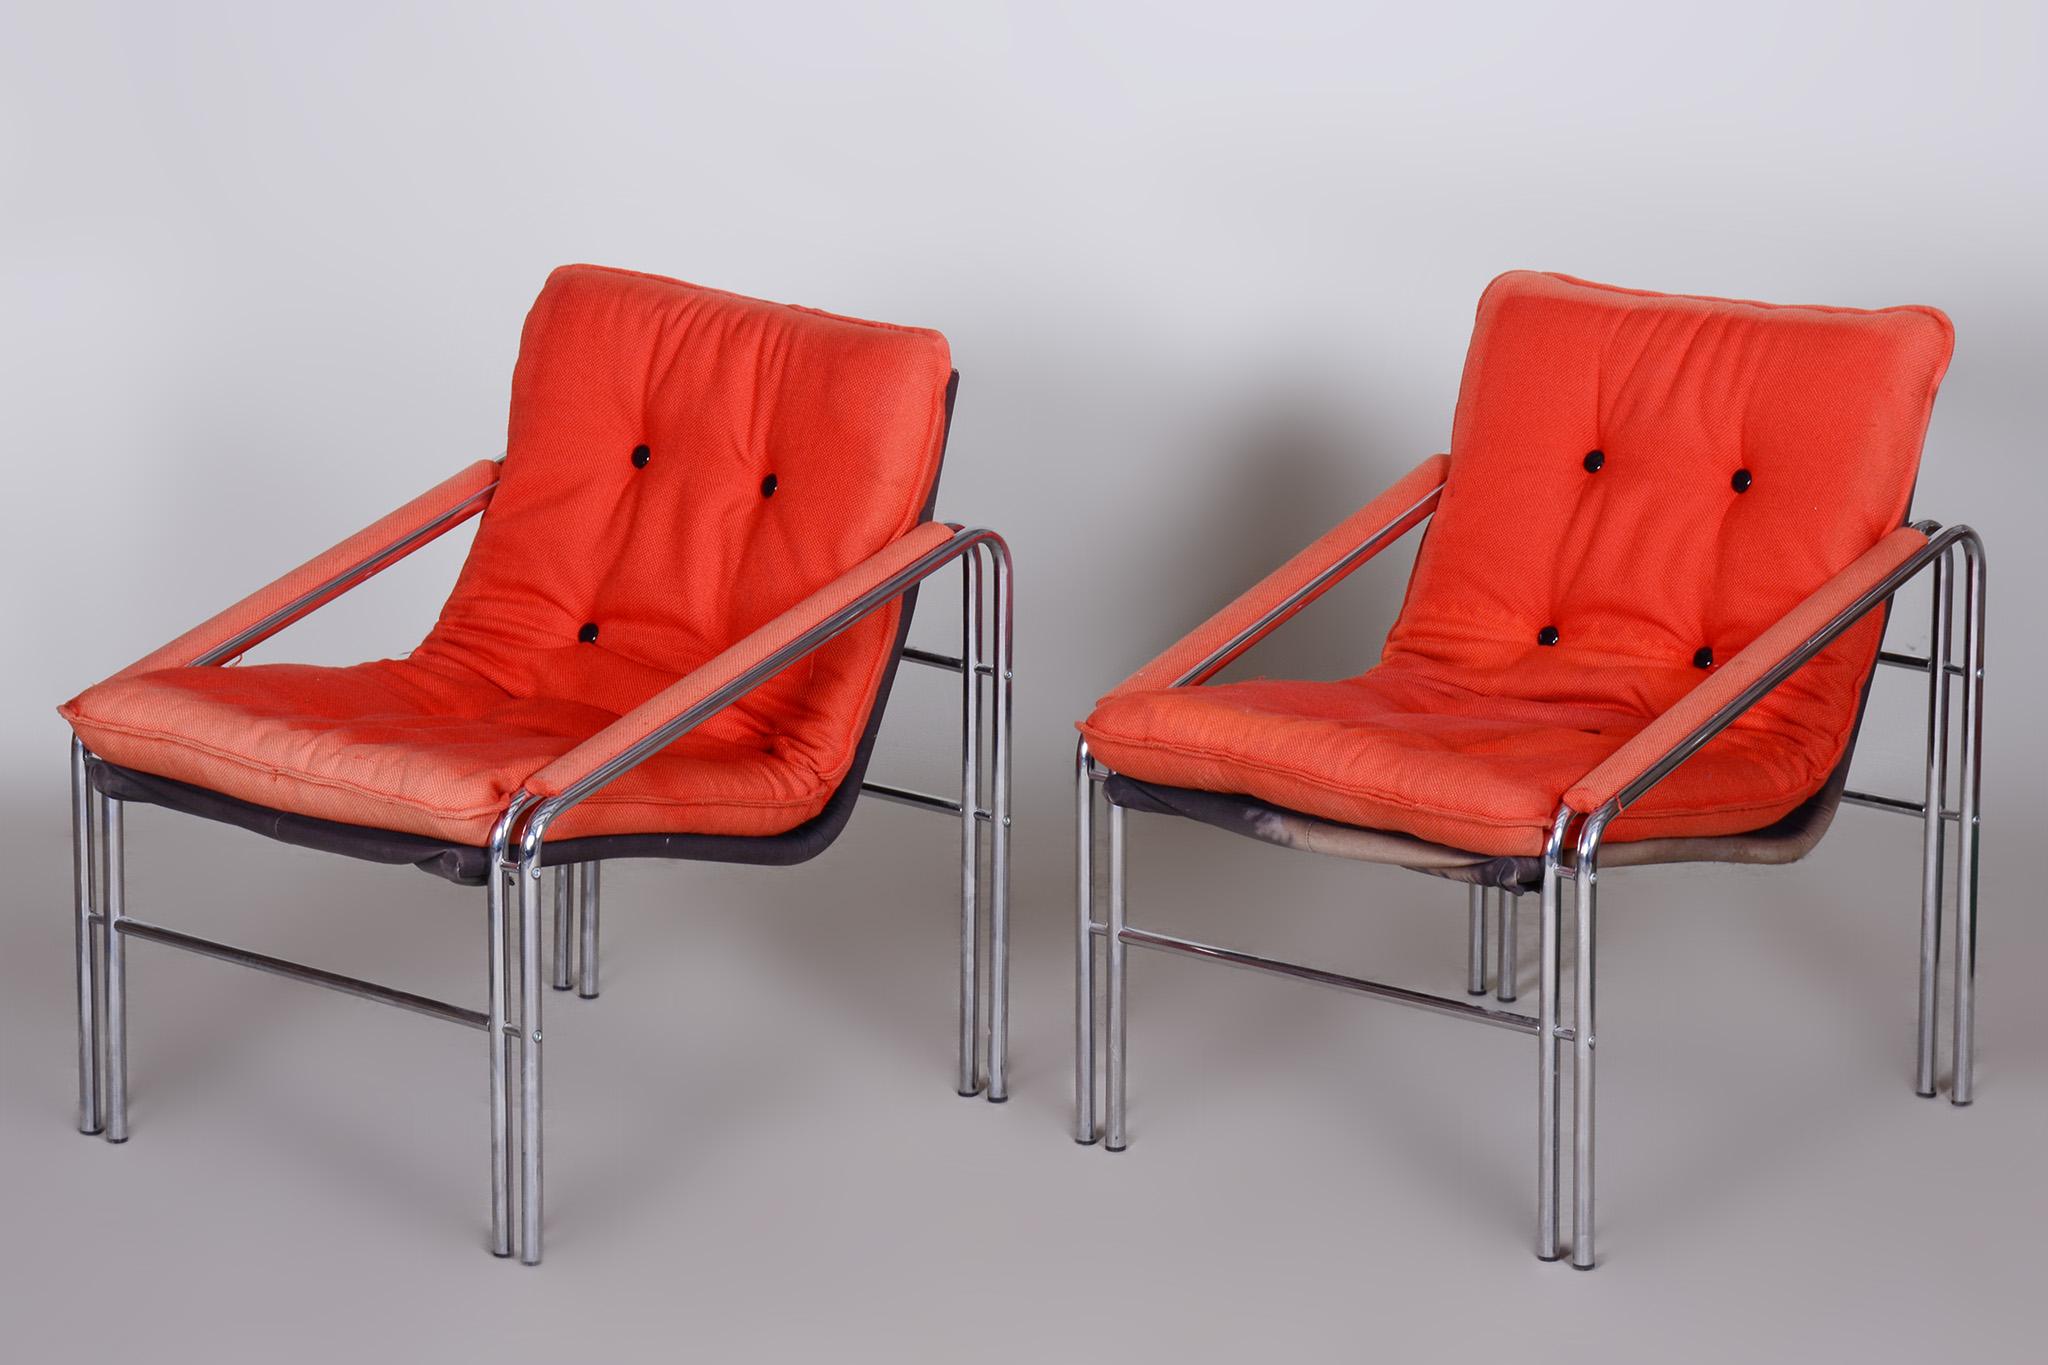 20th Century Original Pair of Midcentury Armchairs, Very Well-Preserved, Czechia, 1960s For Sale